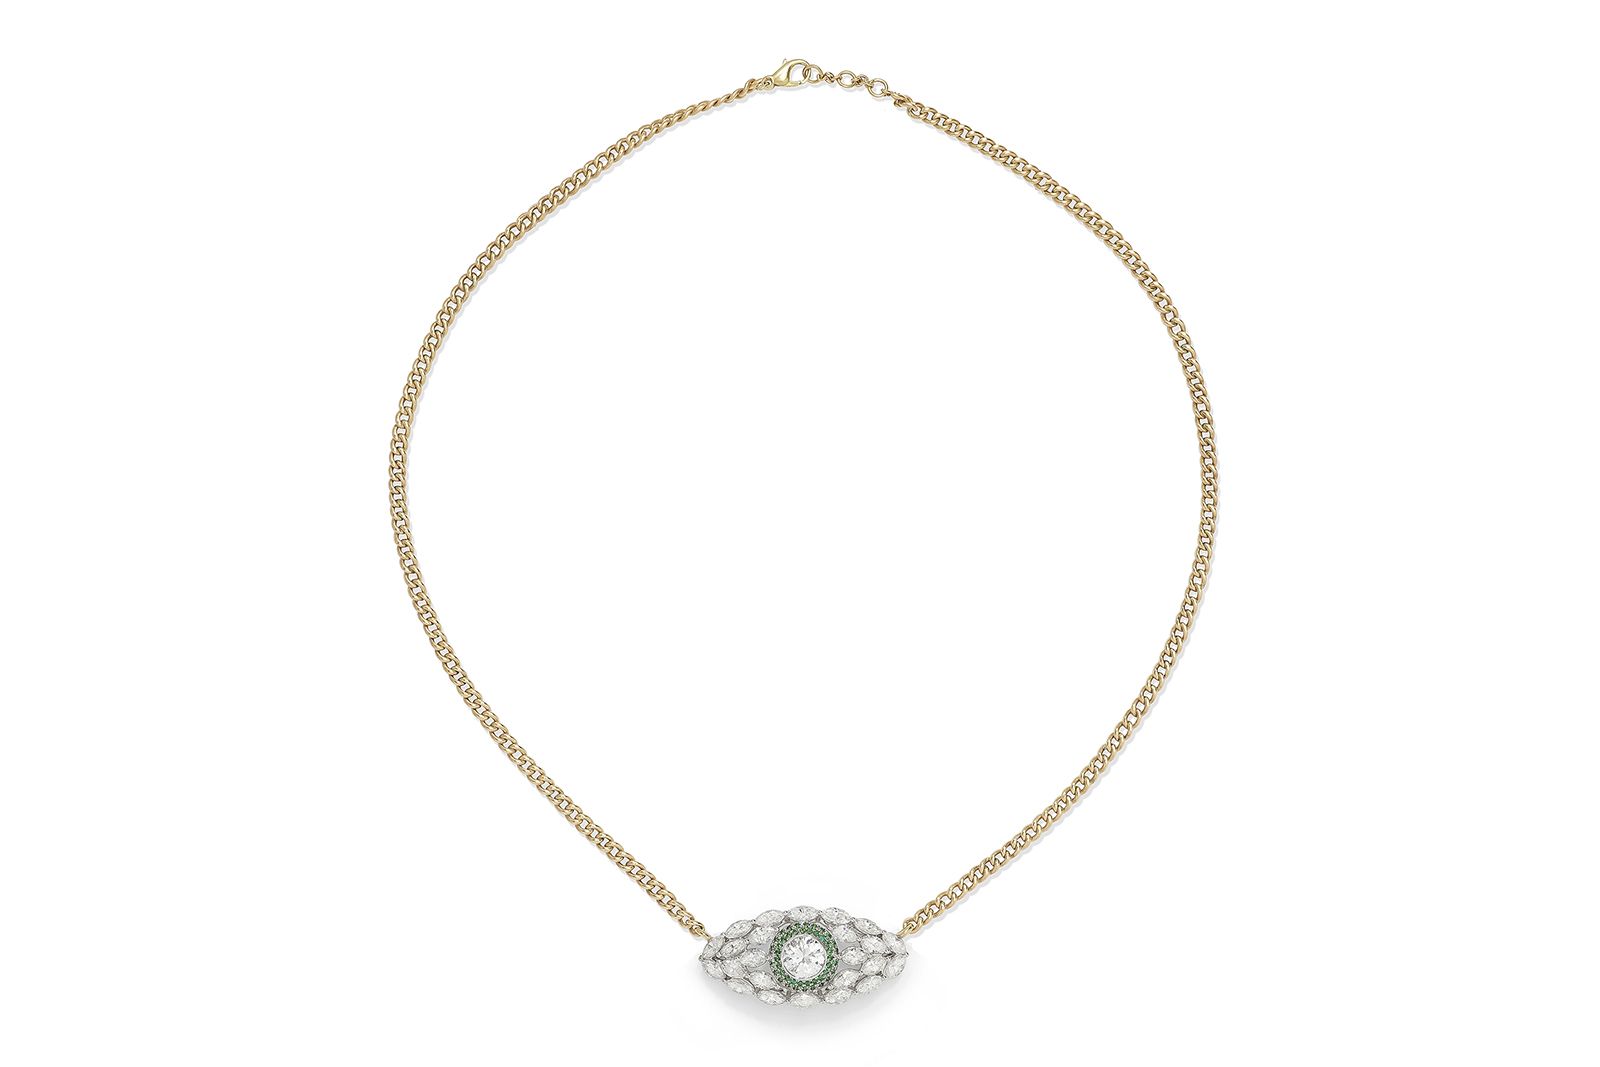 A bespoke-made D. GREGORY Evil Eye necklace in platinum with marquise-shaped diamonds